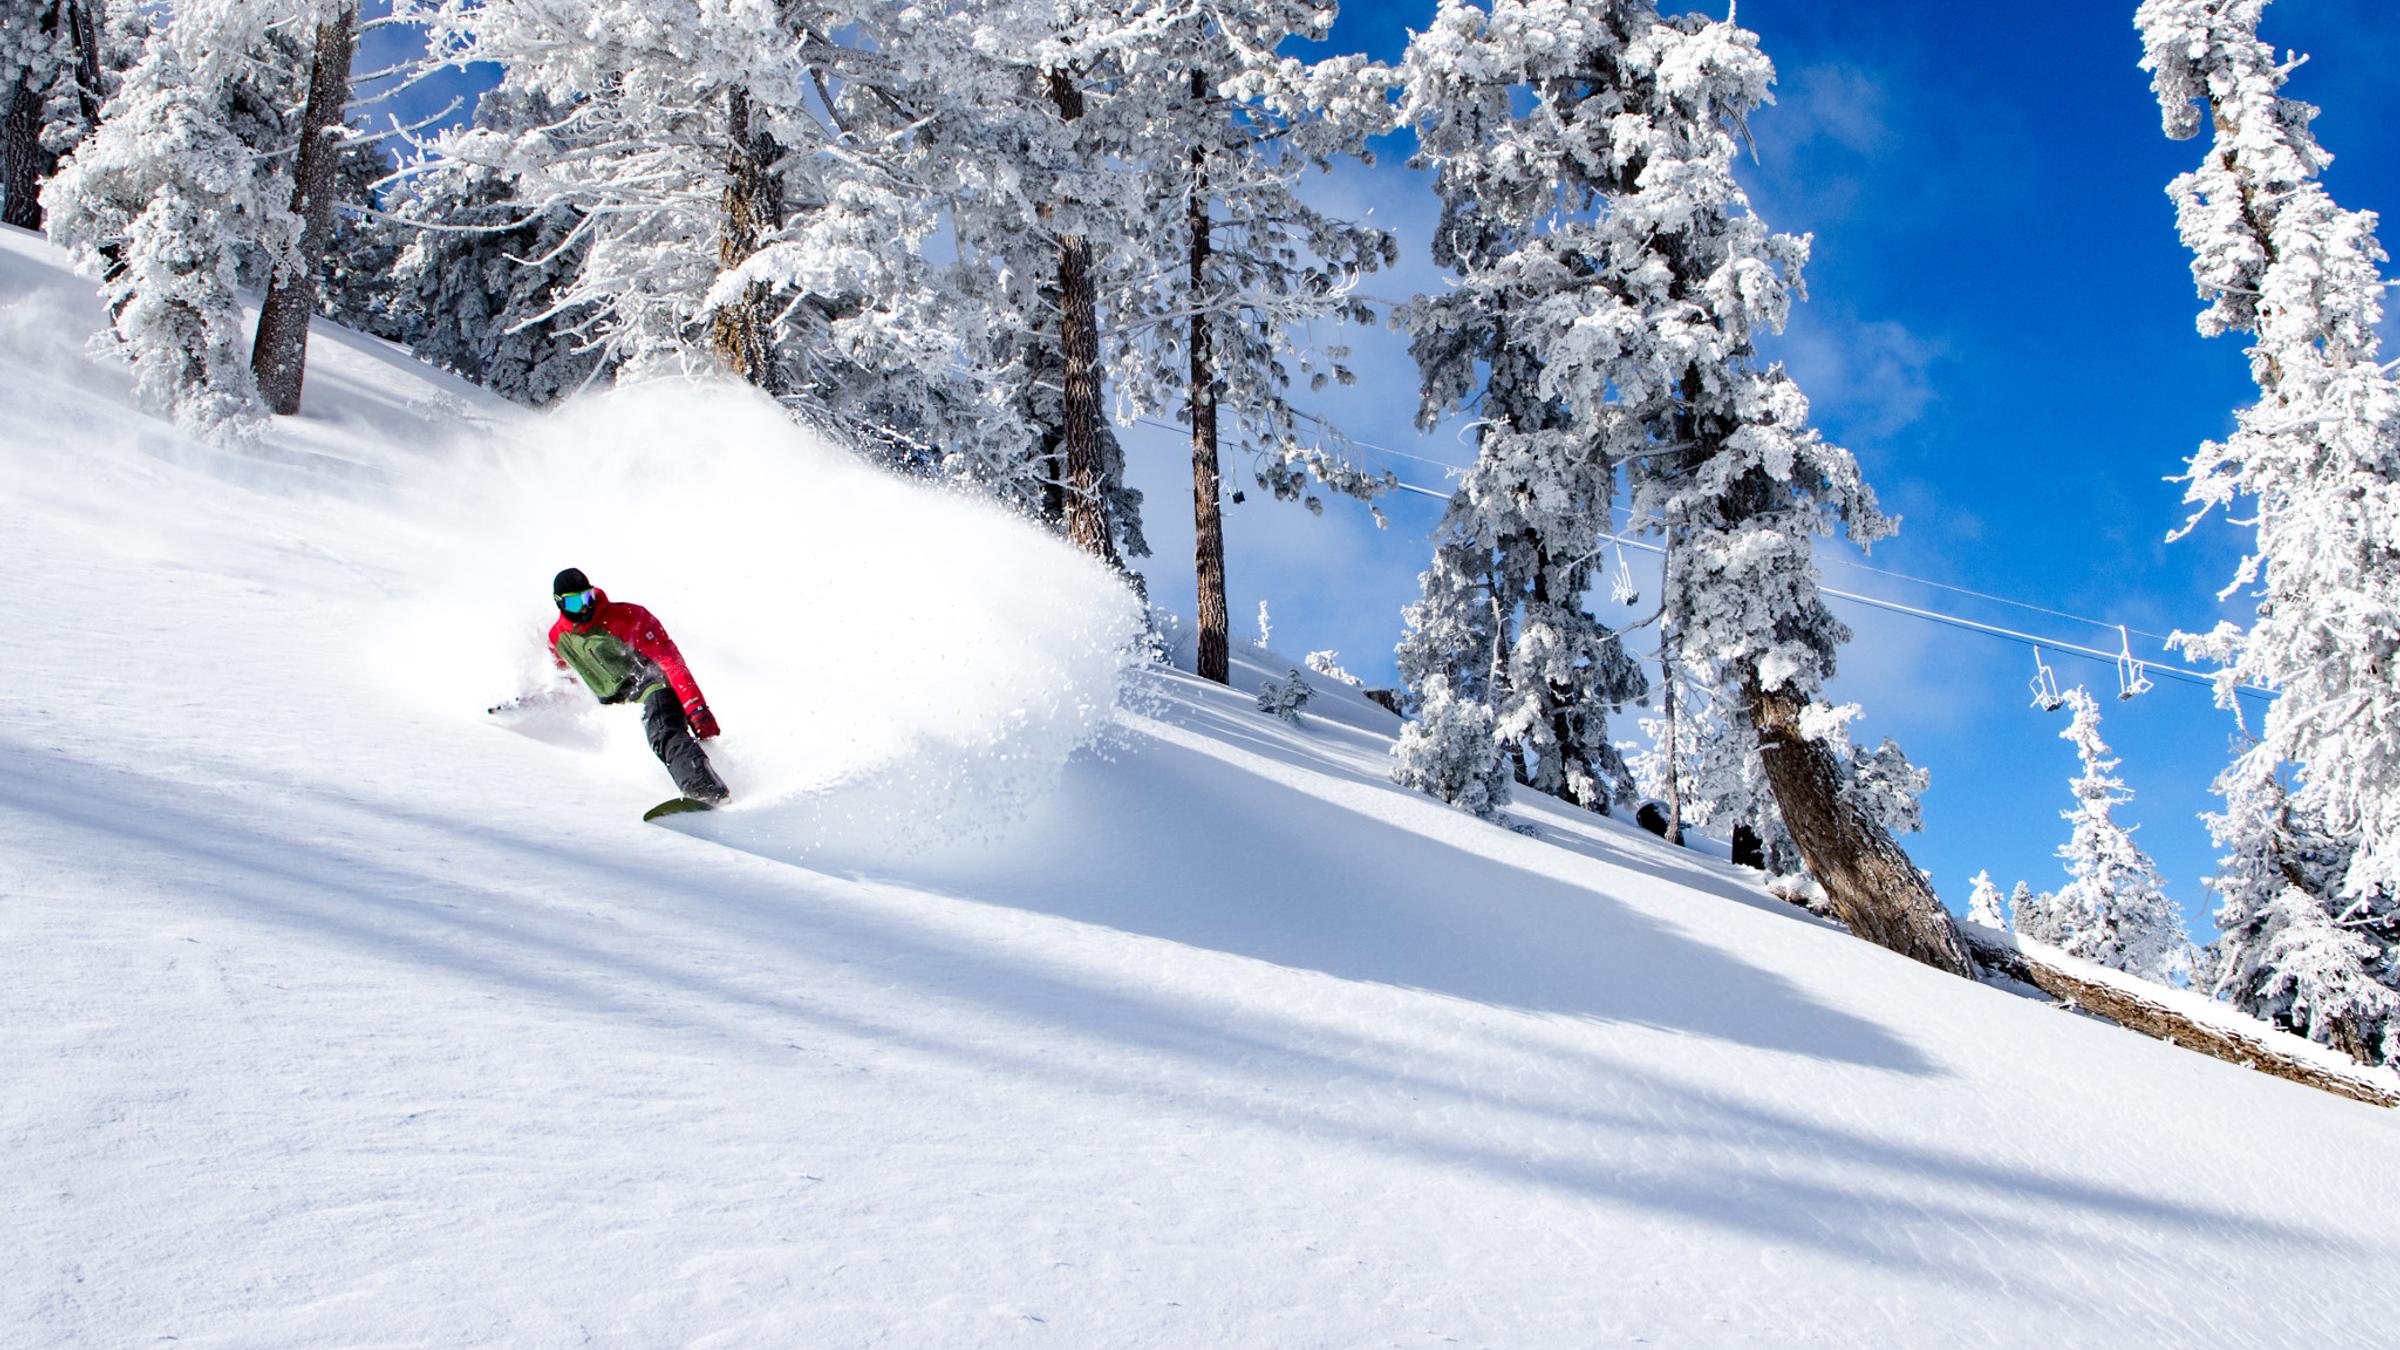 Programs & Services Offered at Big Bear Mountain Resort